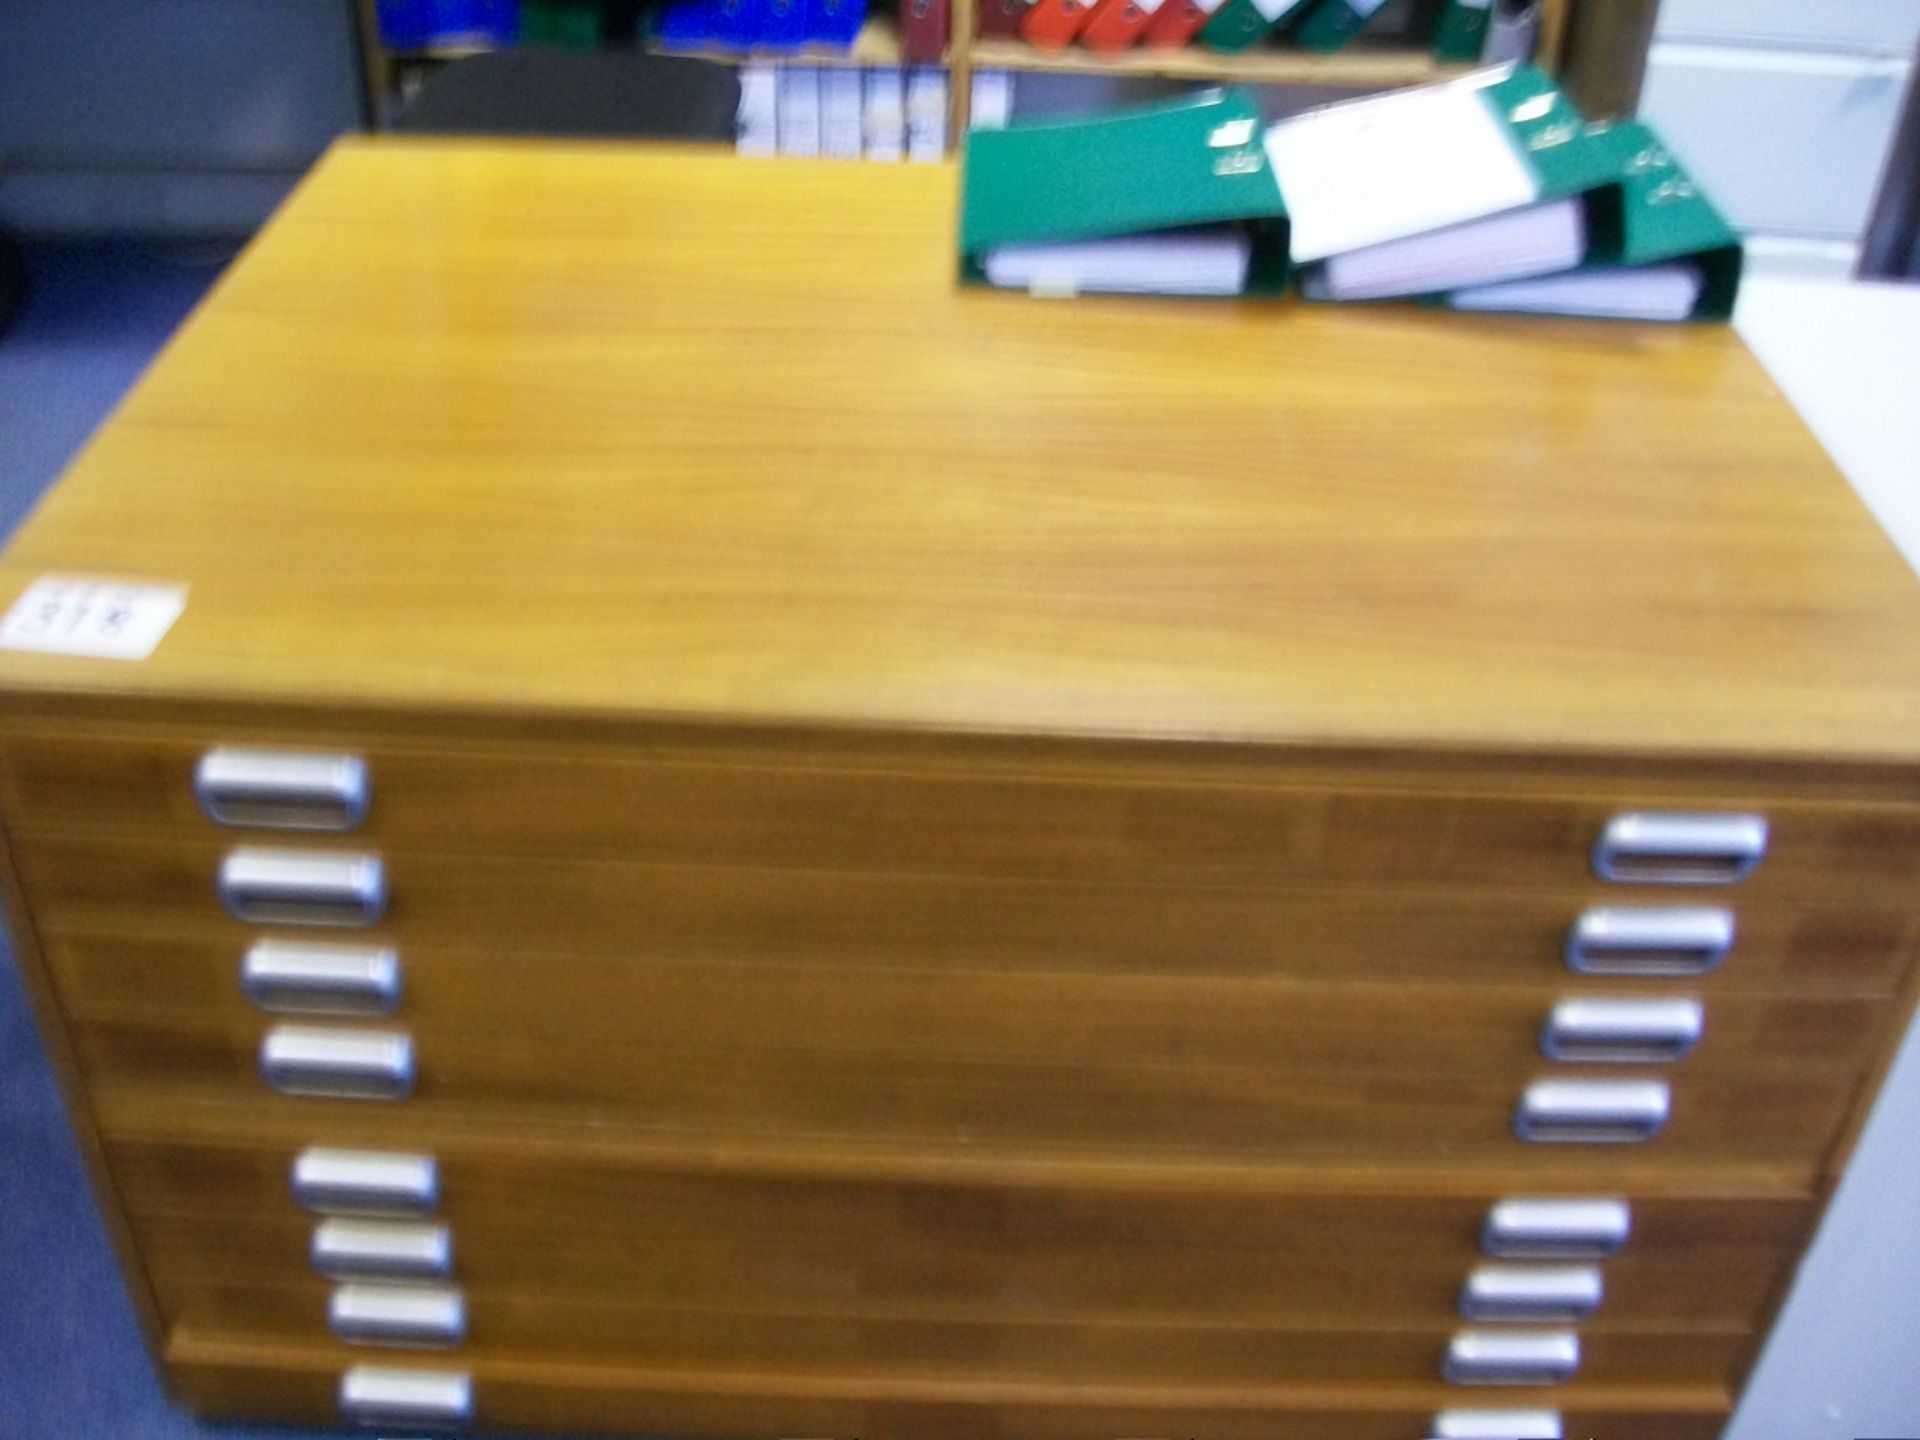 Saple wooden 4' wide x 3' deep 8 drawer PLAN CHEST (Situated at Arthur Amos Associates Ltd, Pool